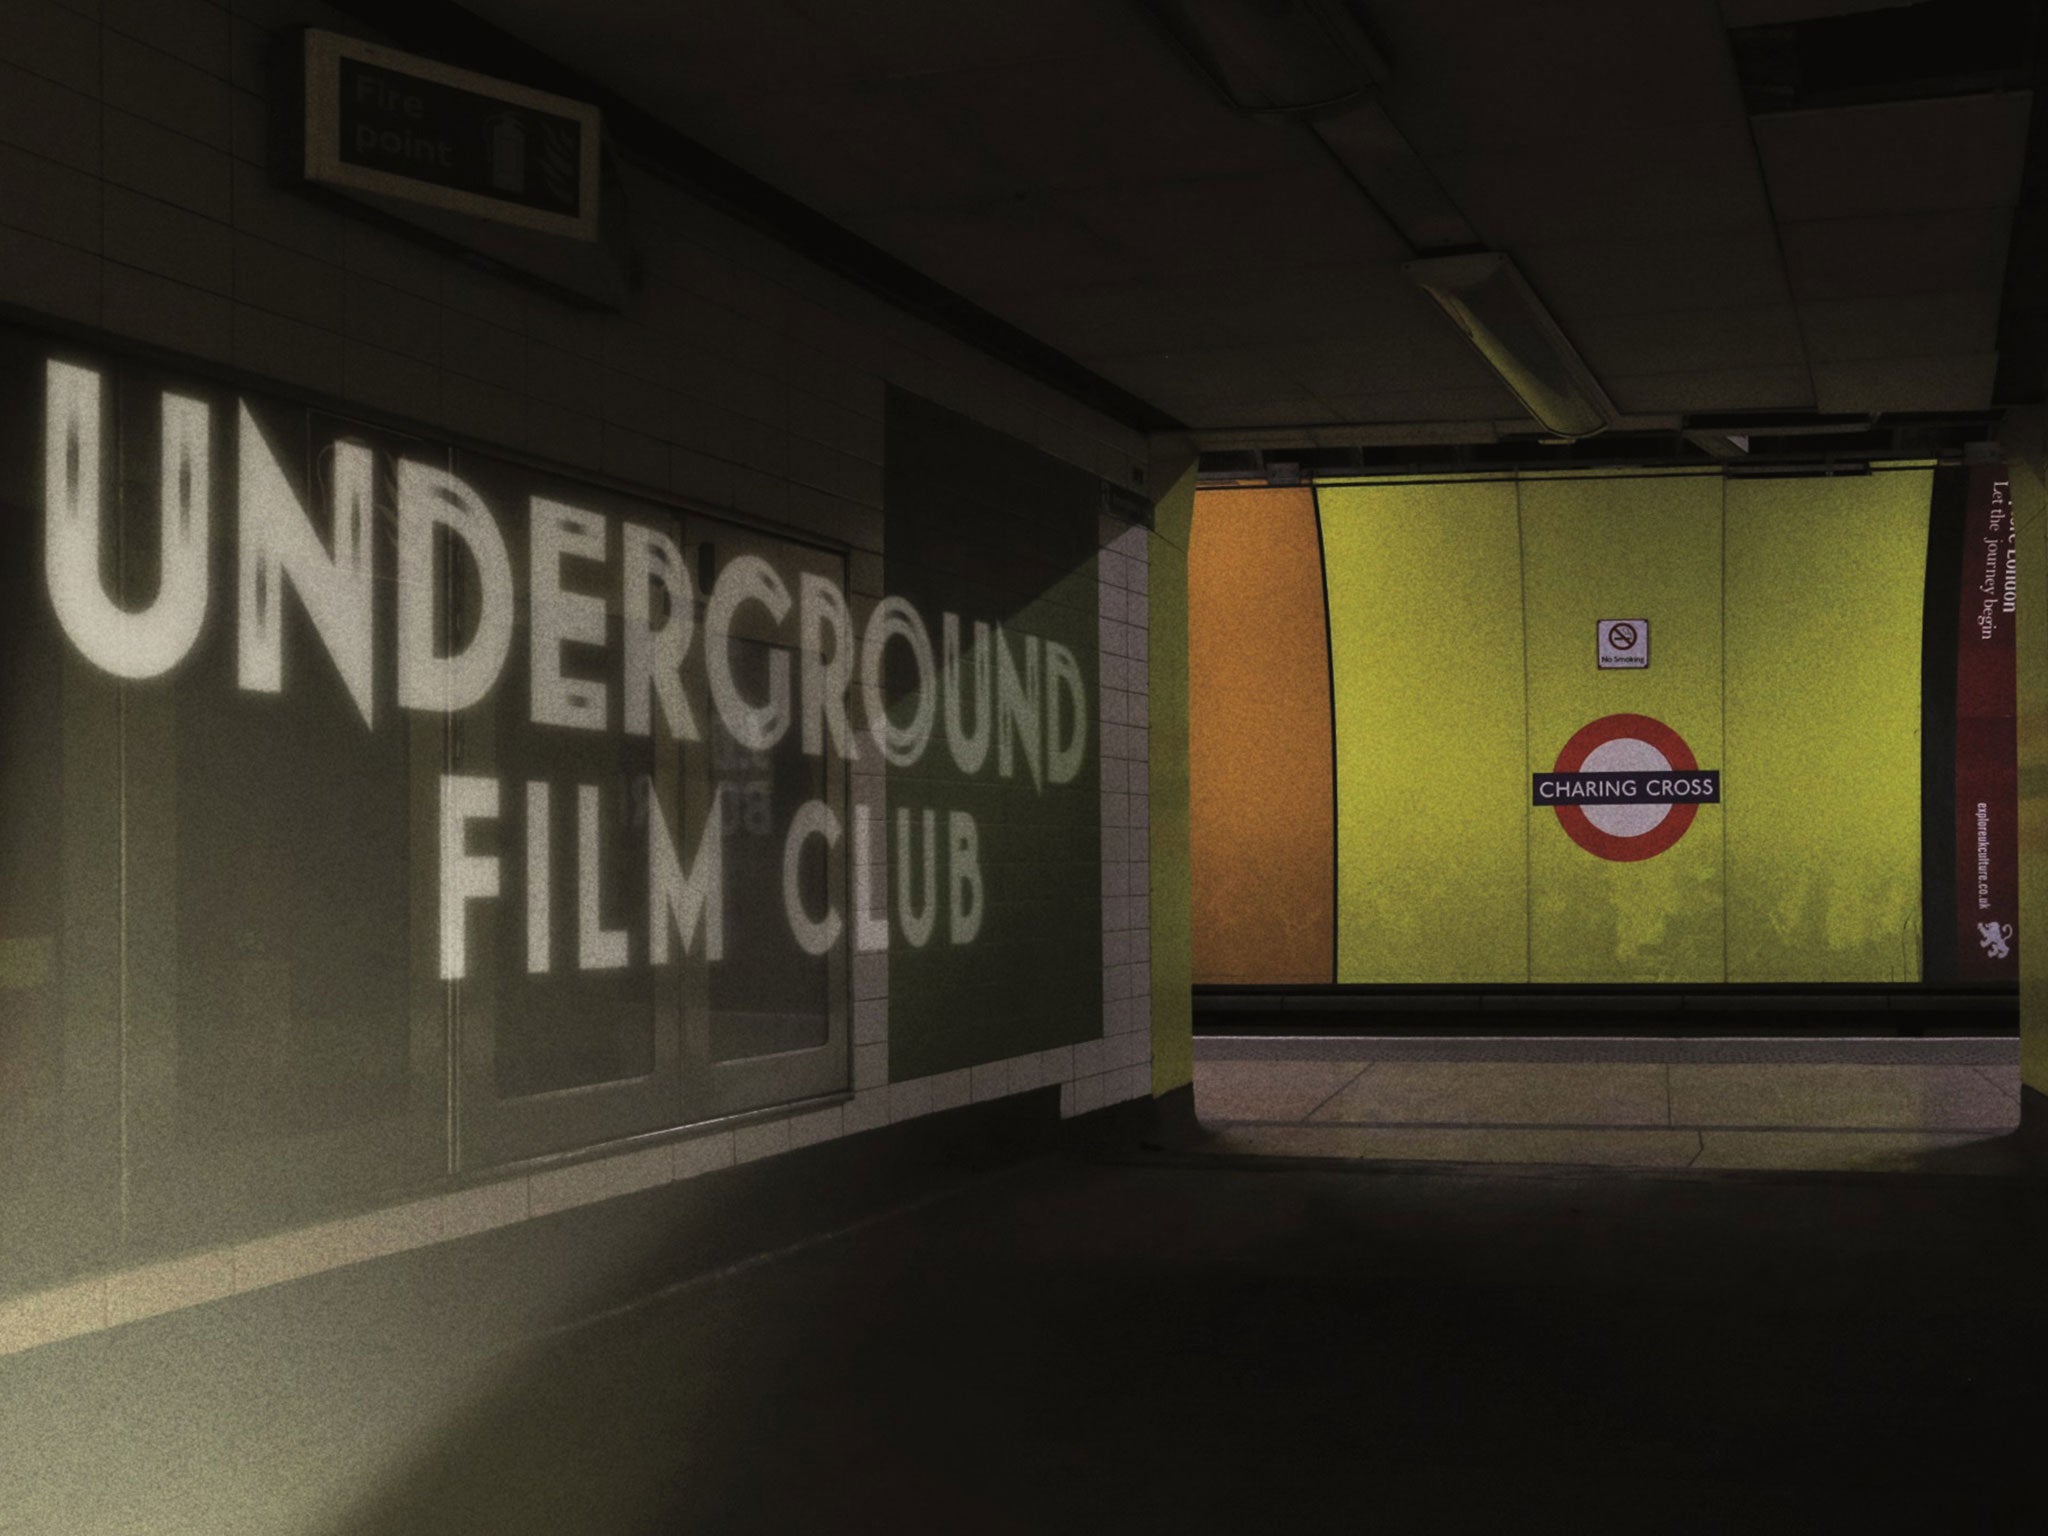 Charing Cross station is coming alive with a pop-up cinema experience